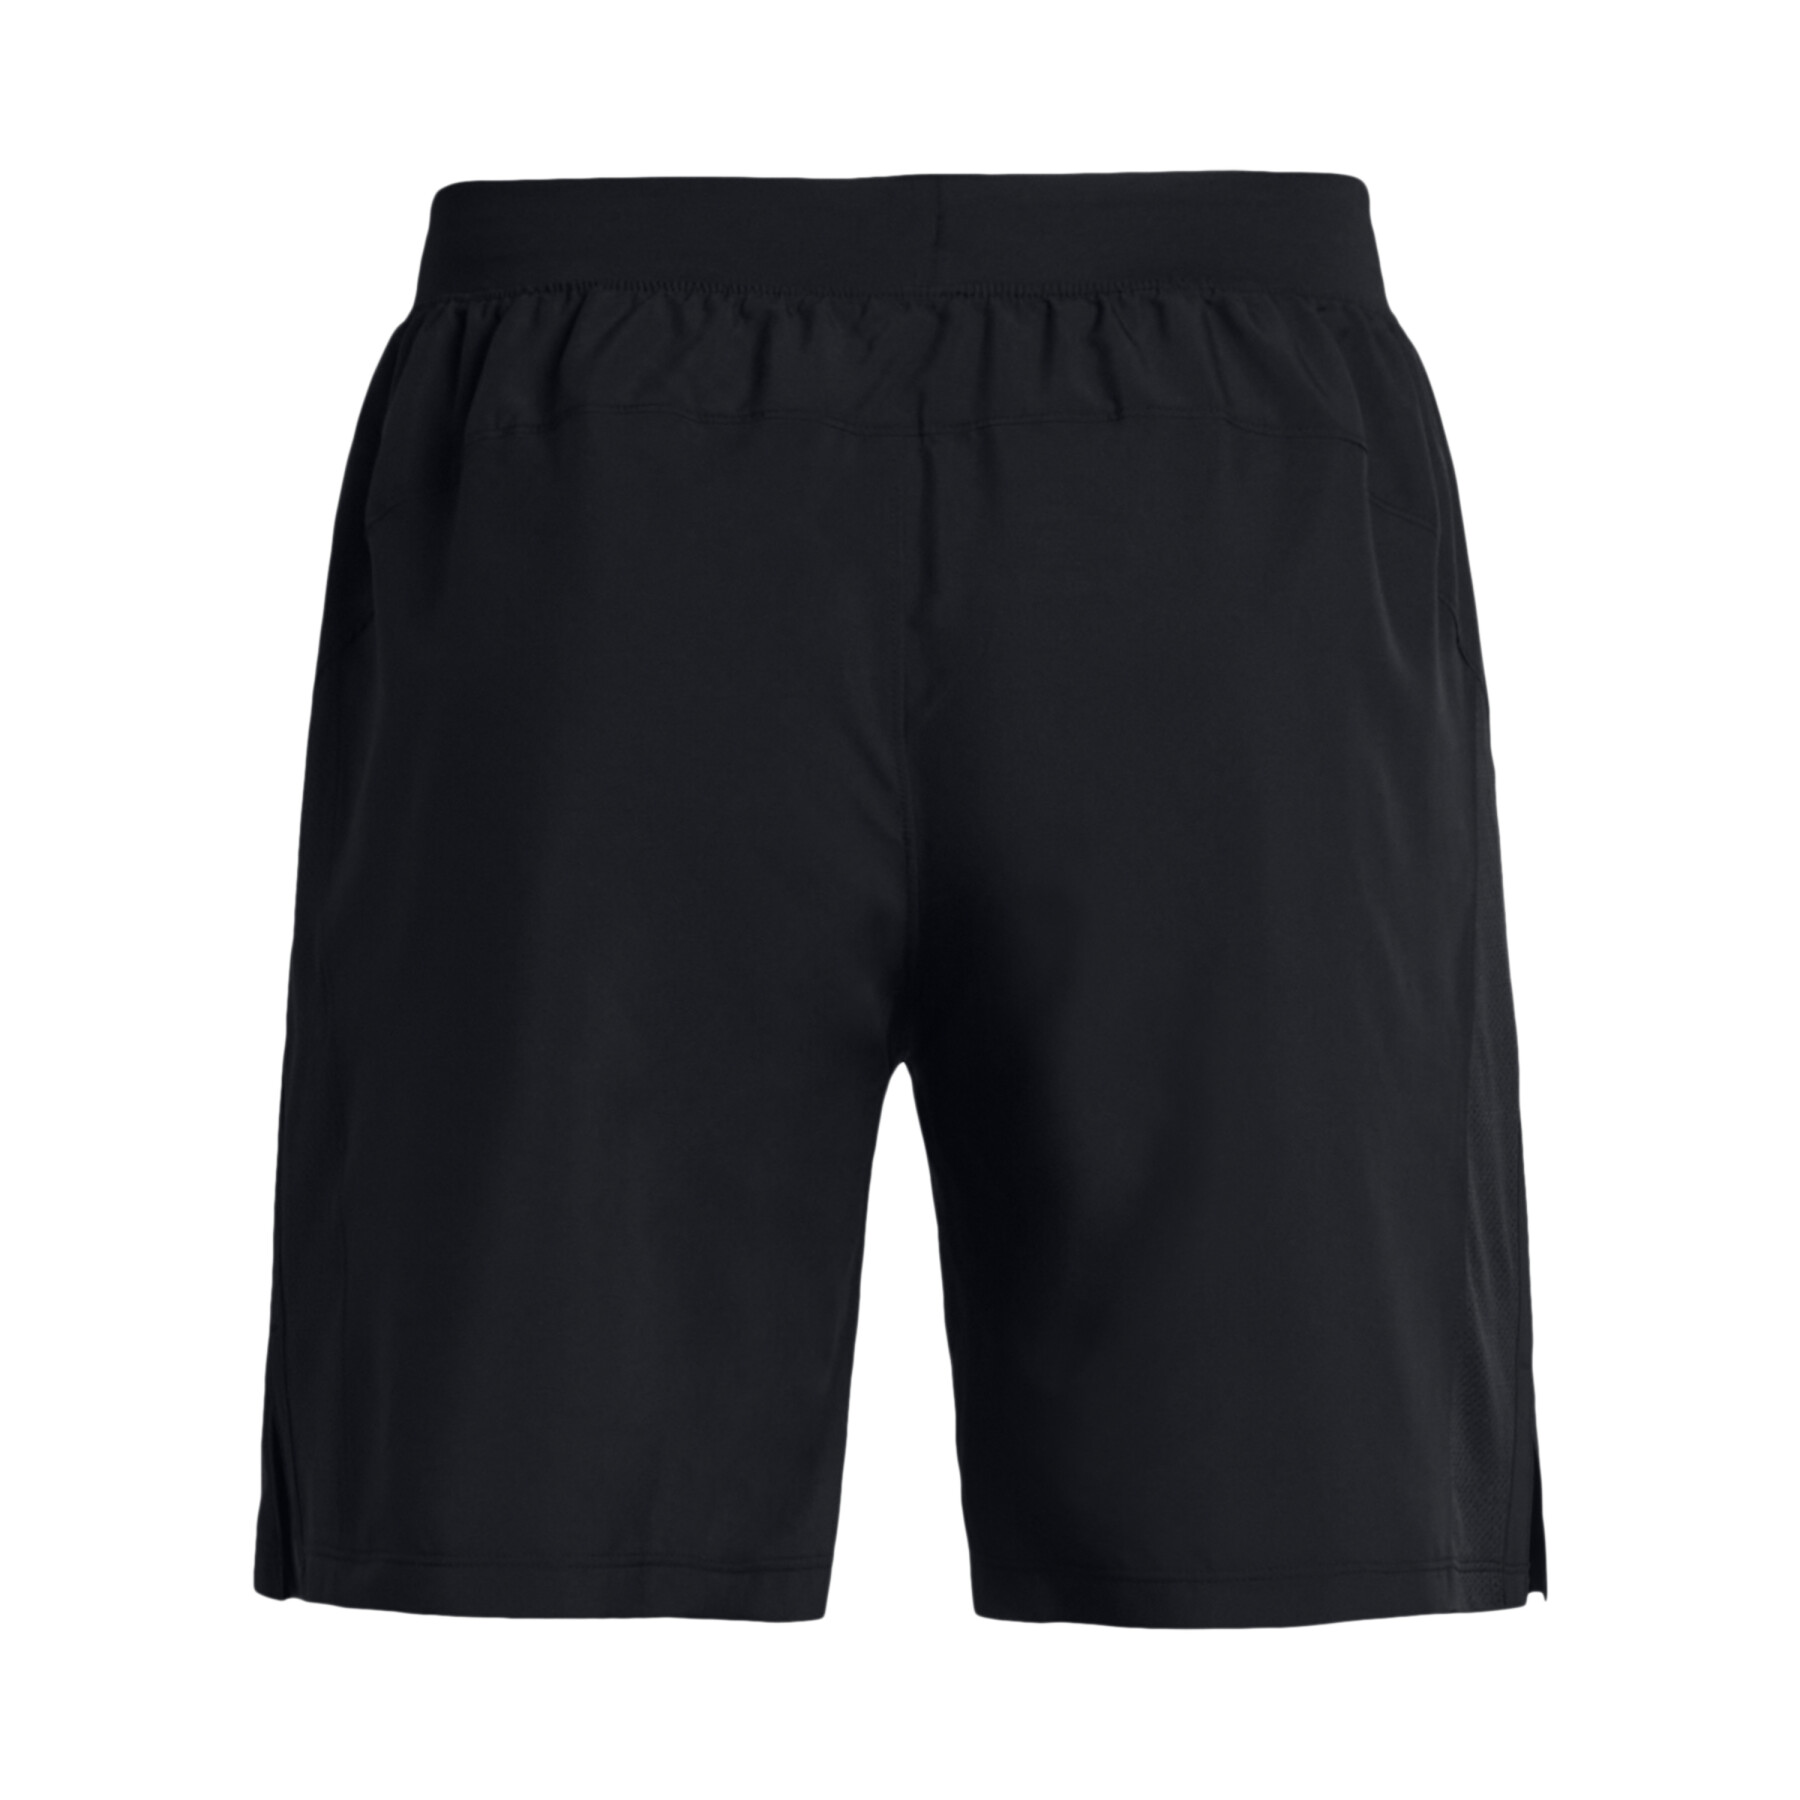 Unlined shorts Under Armour Launch 7"